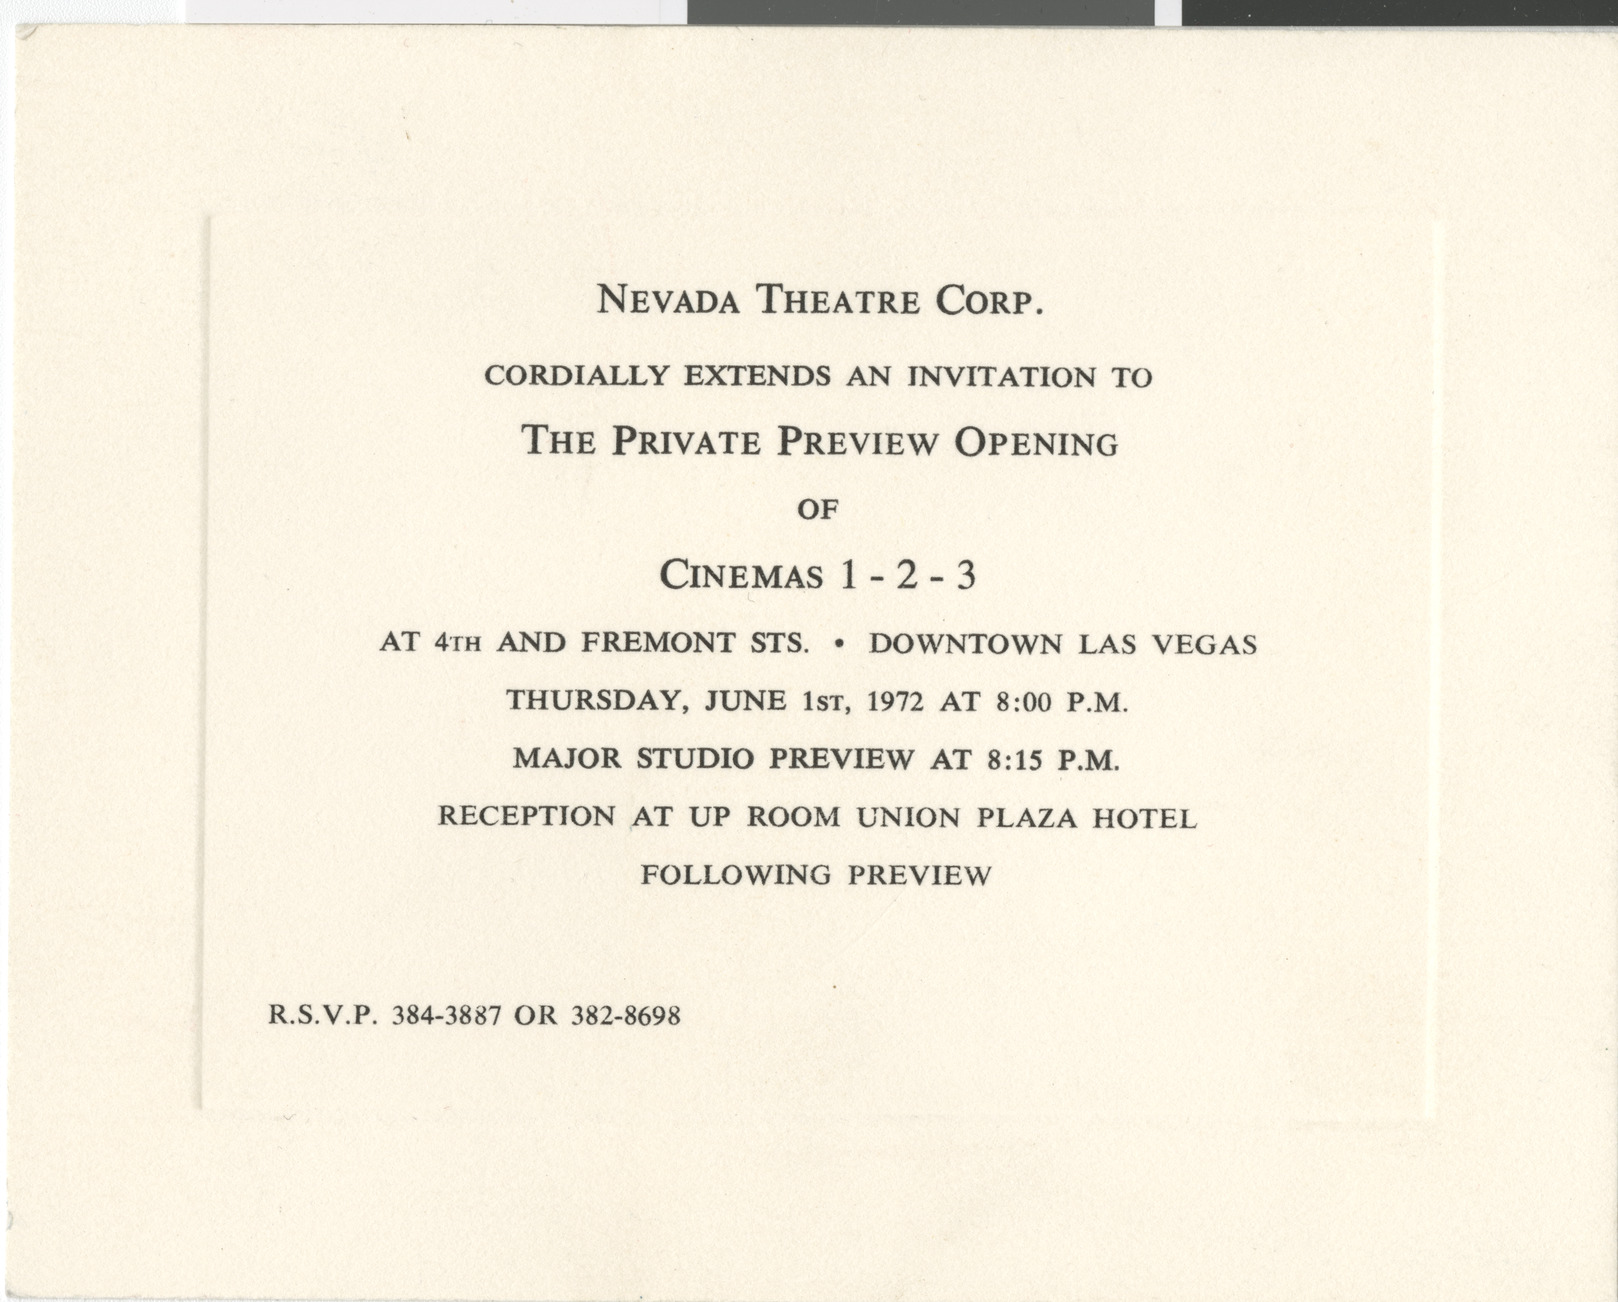 Invitation to the Private Preview Opening of Cinemas 1-2-3, June 1, 1972